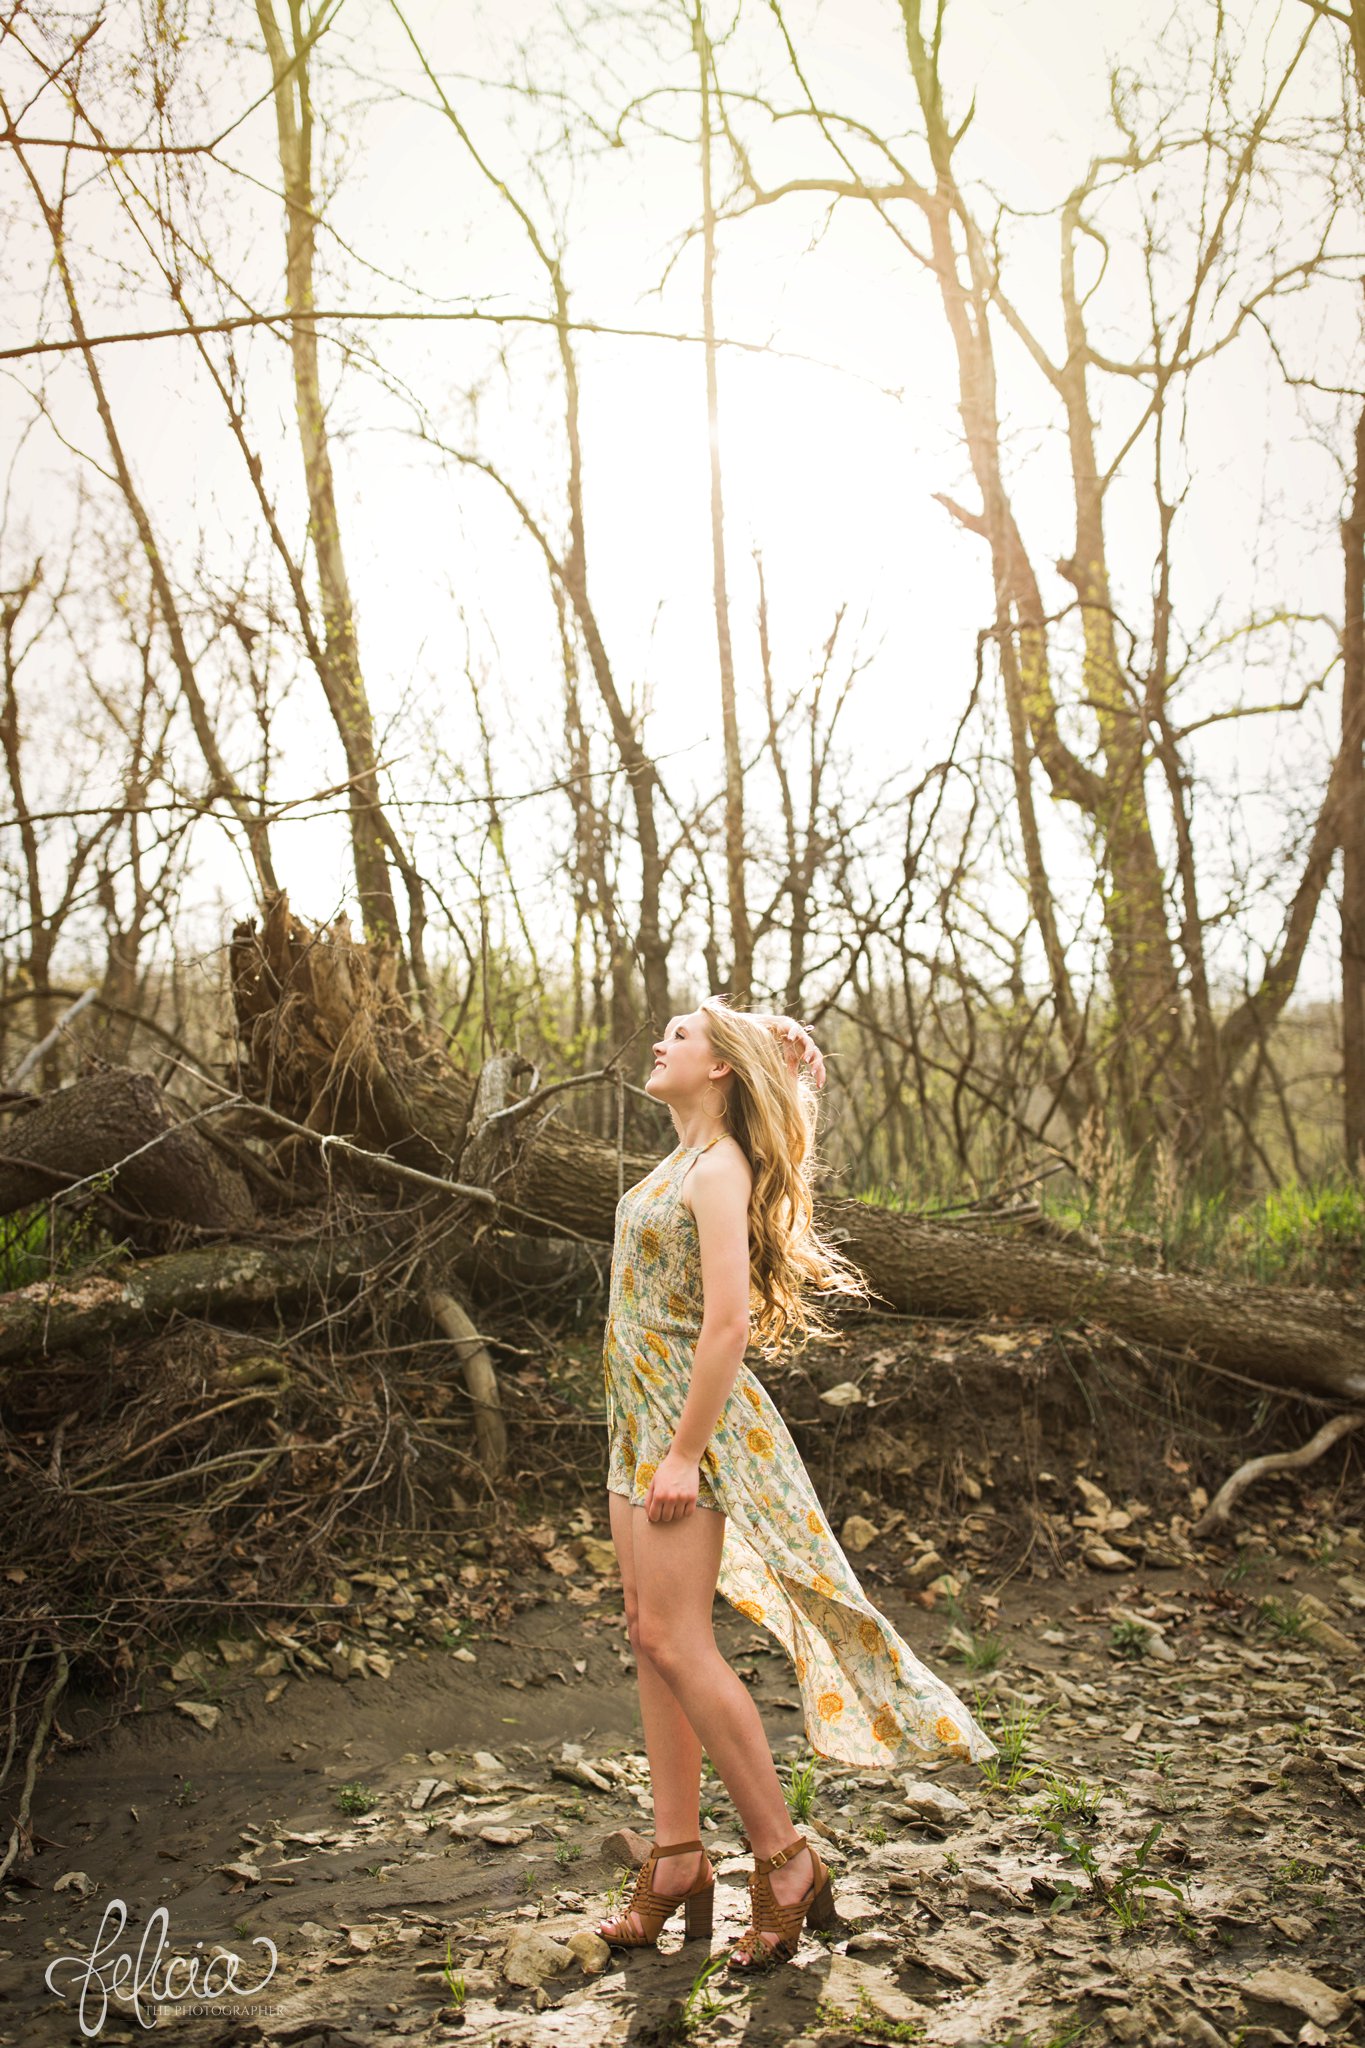 senior pictures | images by feliciathephotographer.com | Kansas City | rustic | blonde | whimsical | nature | trees | flower print dress | yellow dress 